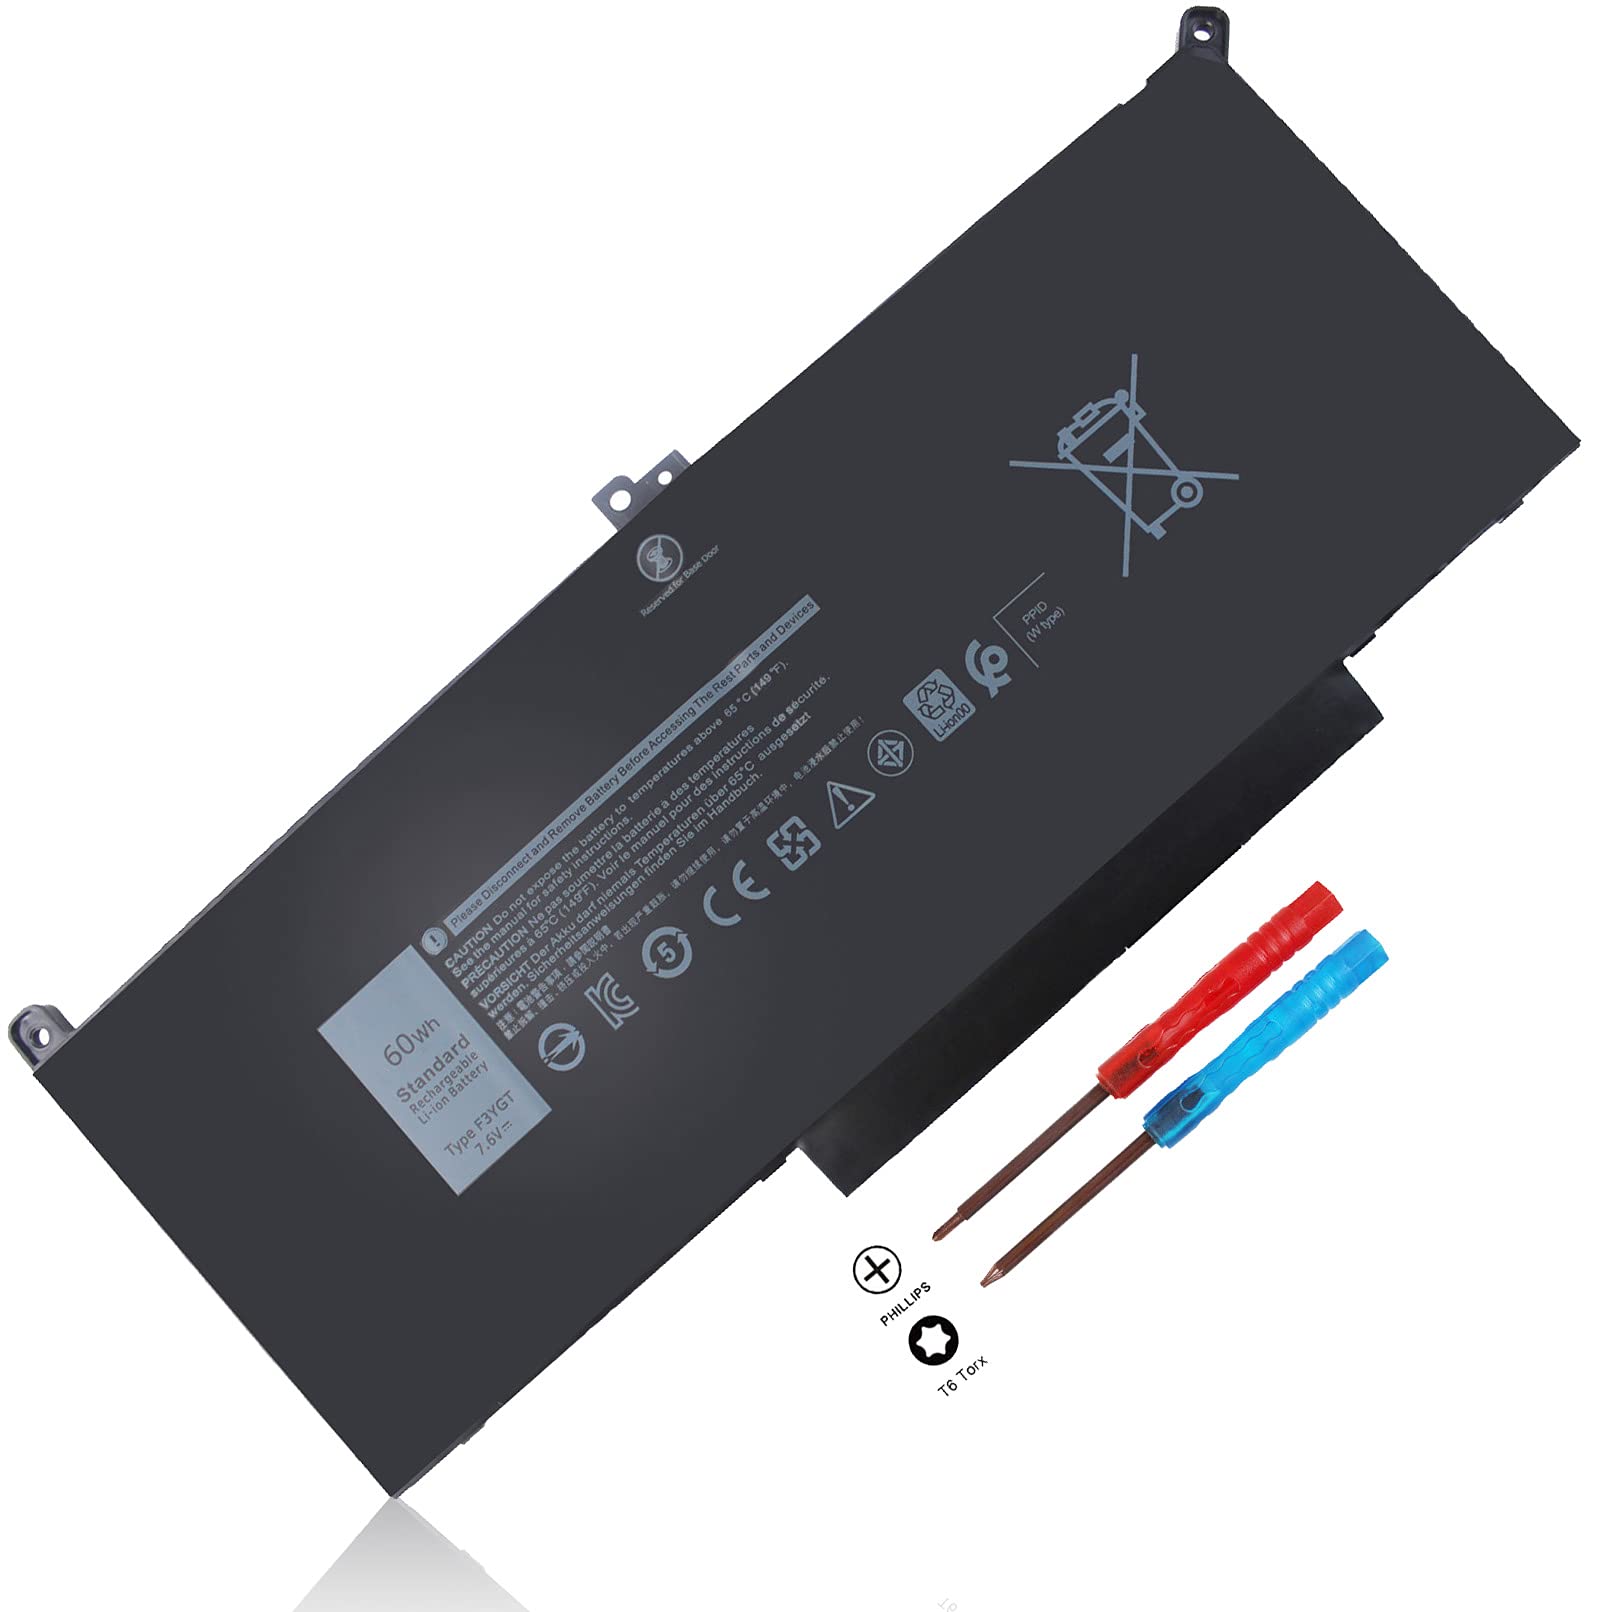 Dell Latitude 7280 battery icon with low battery symbol